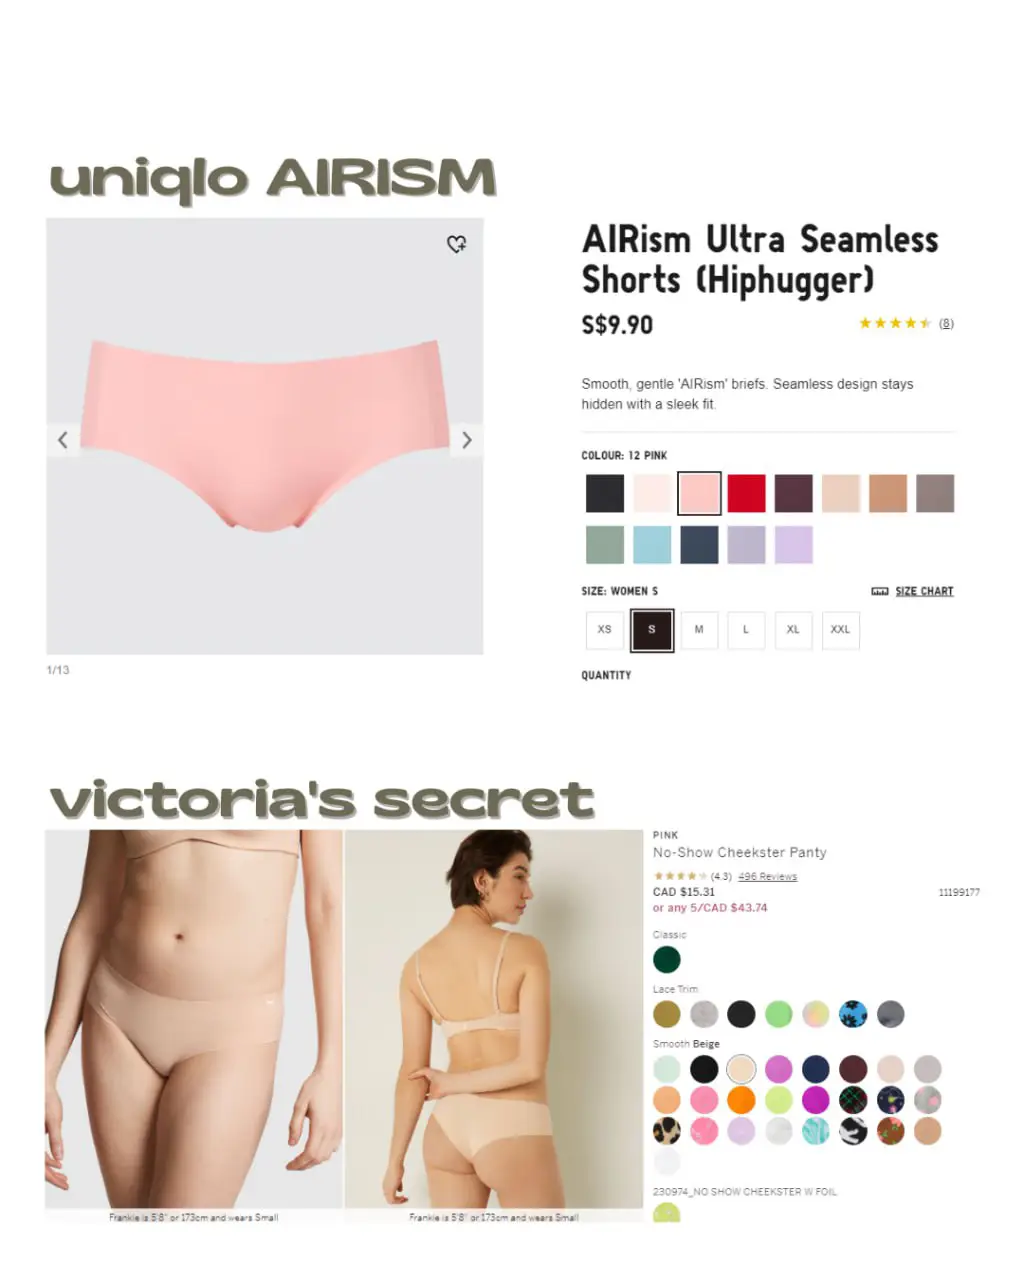 Review of Cargo Joggers, Airism Ultra Seamless Boxers and